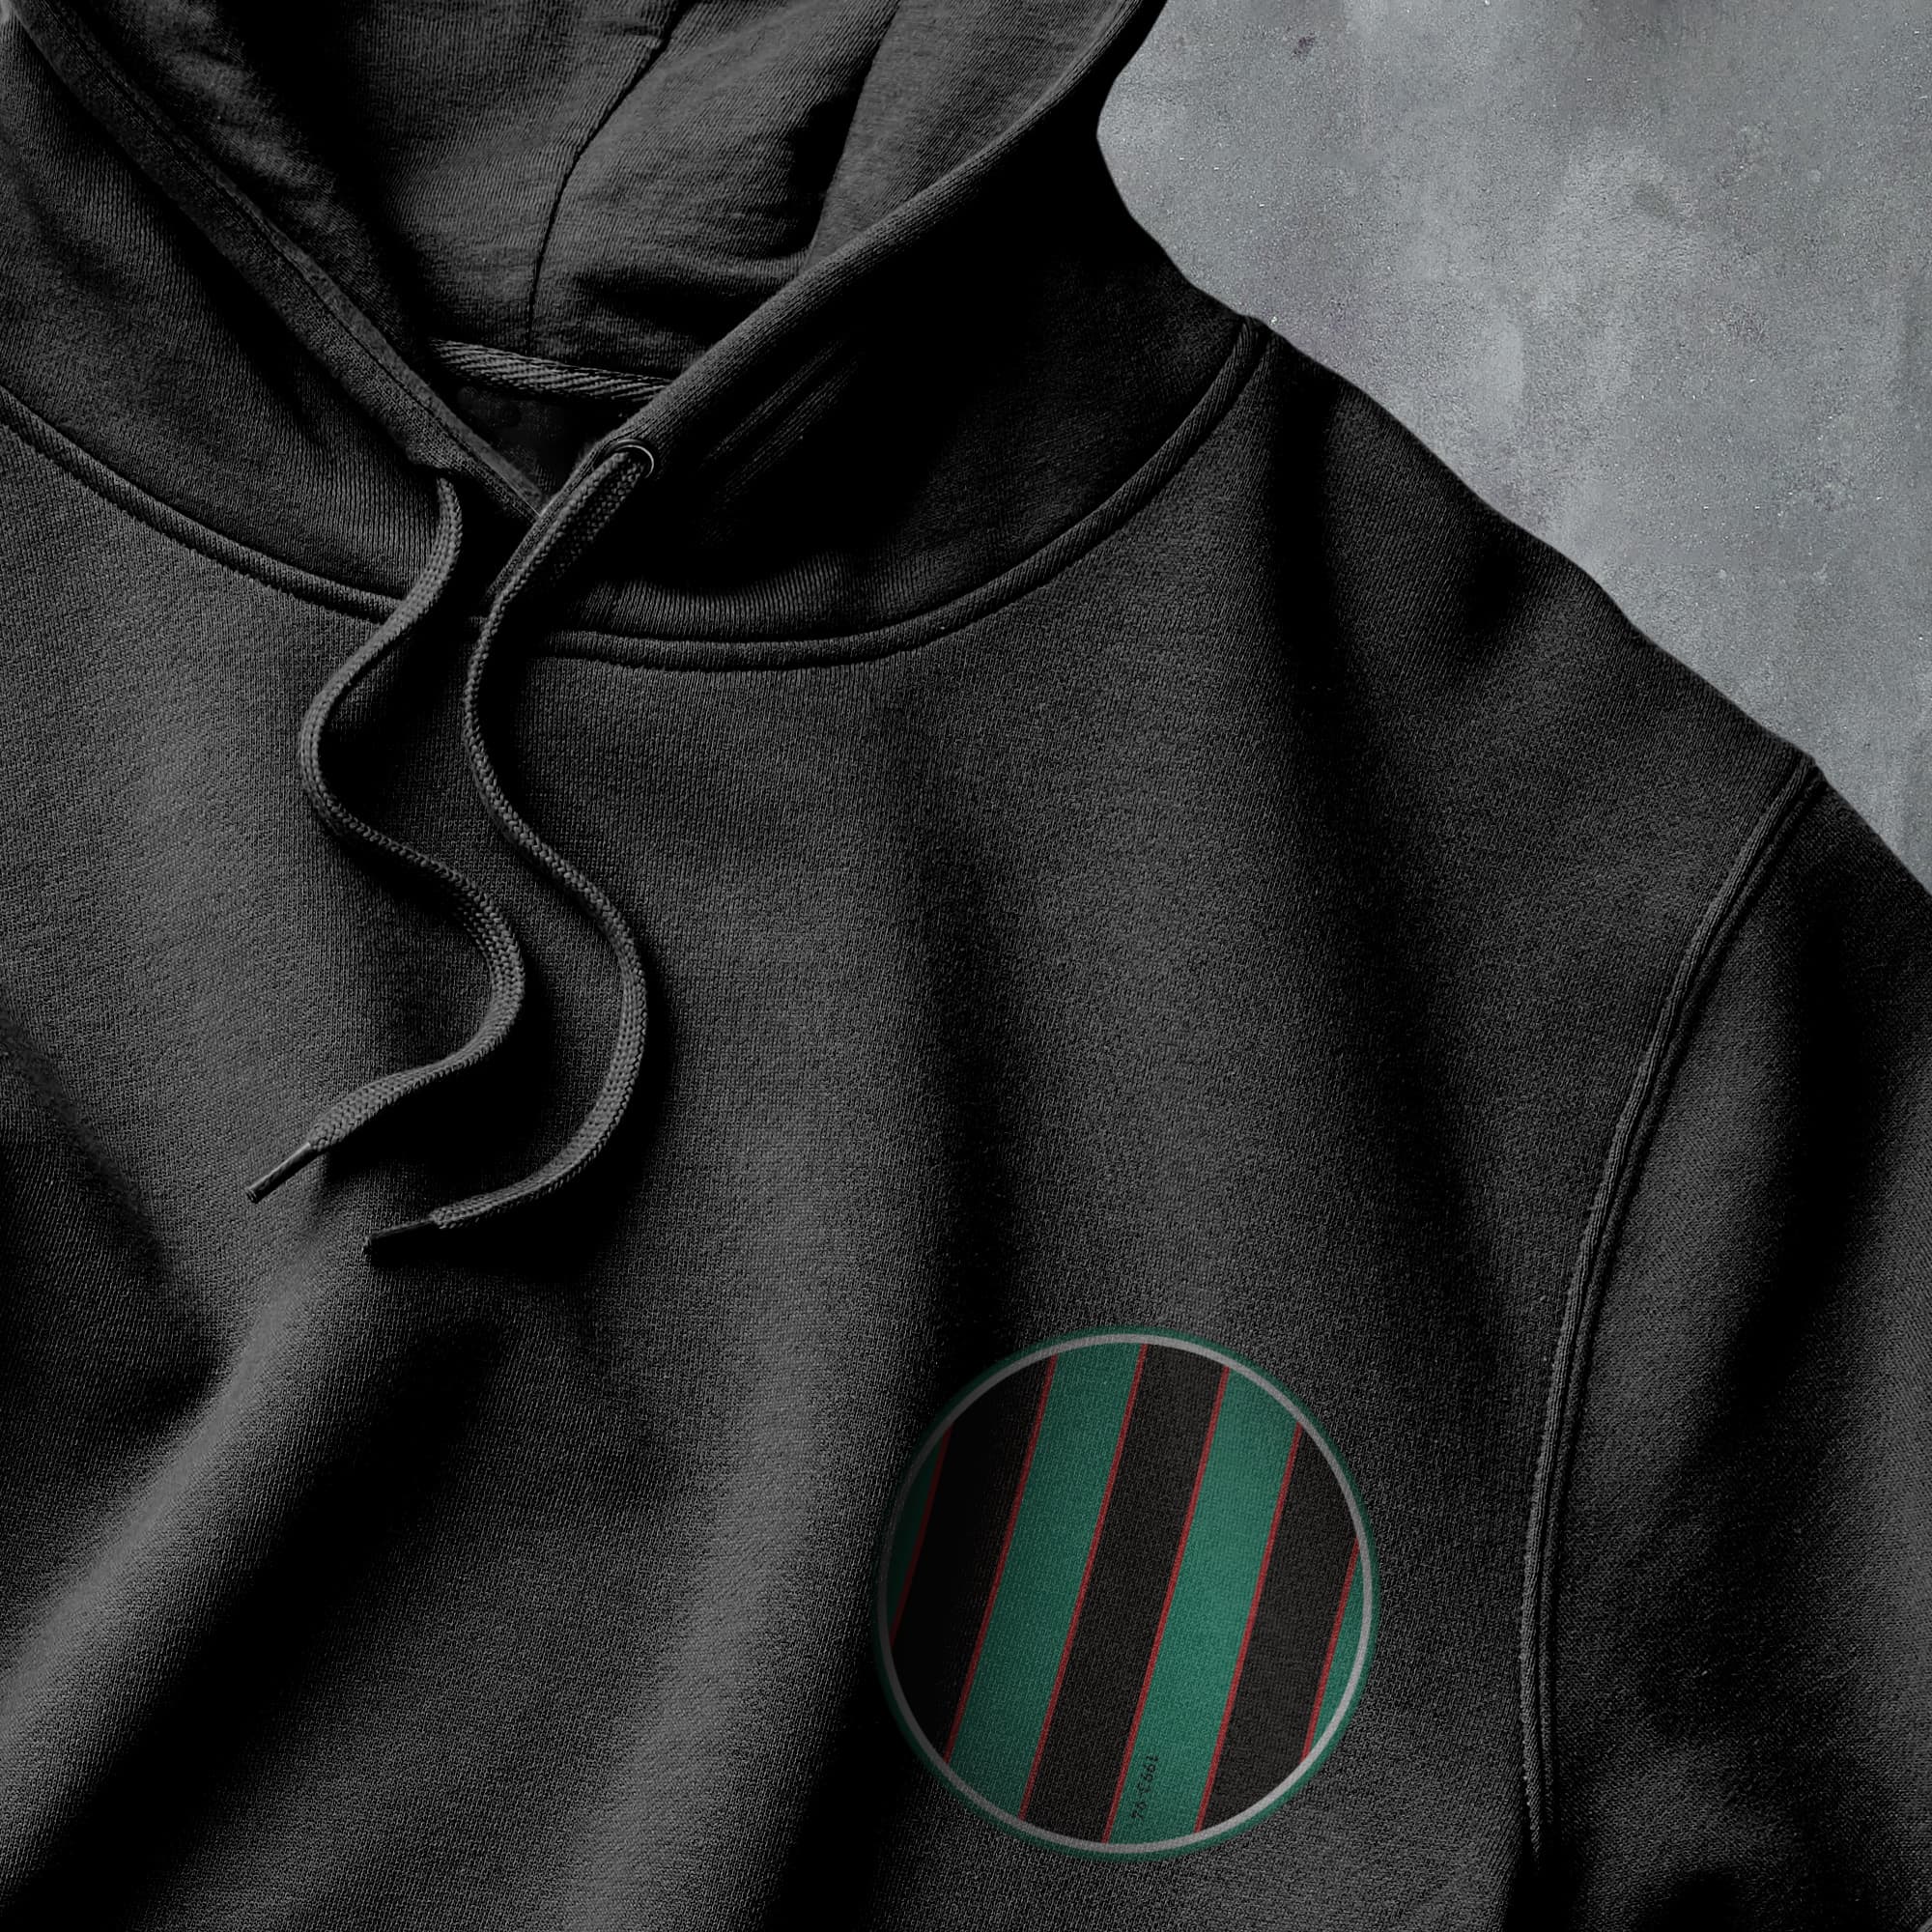 a close up of a black hoodie with a green circle on it